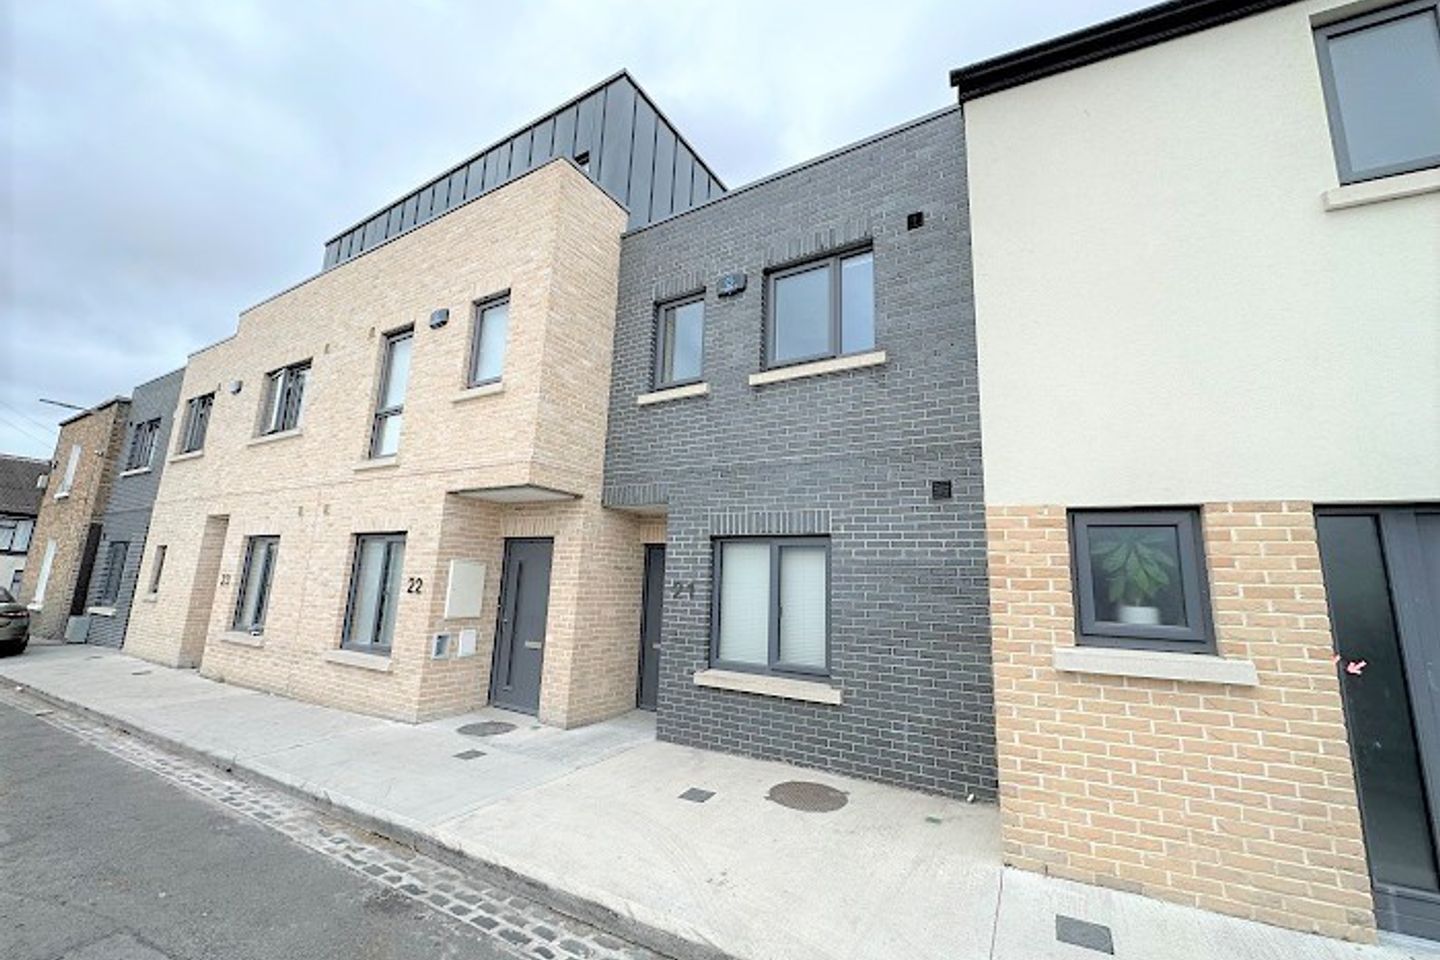  21-25 Arbour Place, Investment Opportunity of 5 Contemporary 2, 3, & 4 Bed Town, Stoneybatter, Dublin 7, D07AR26